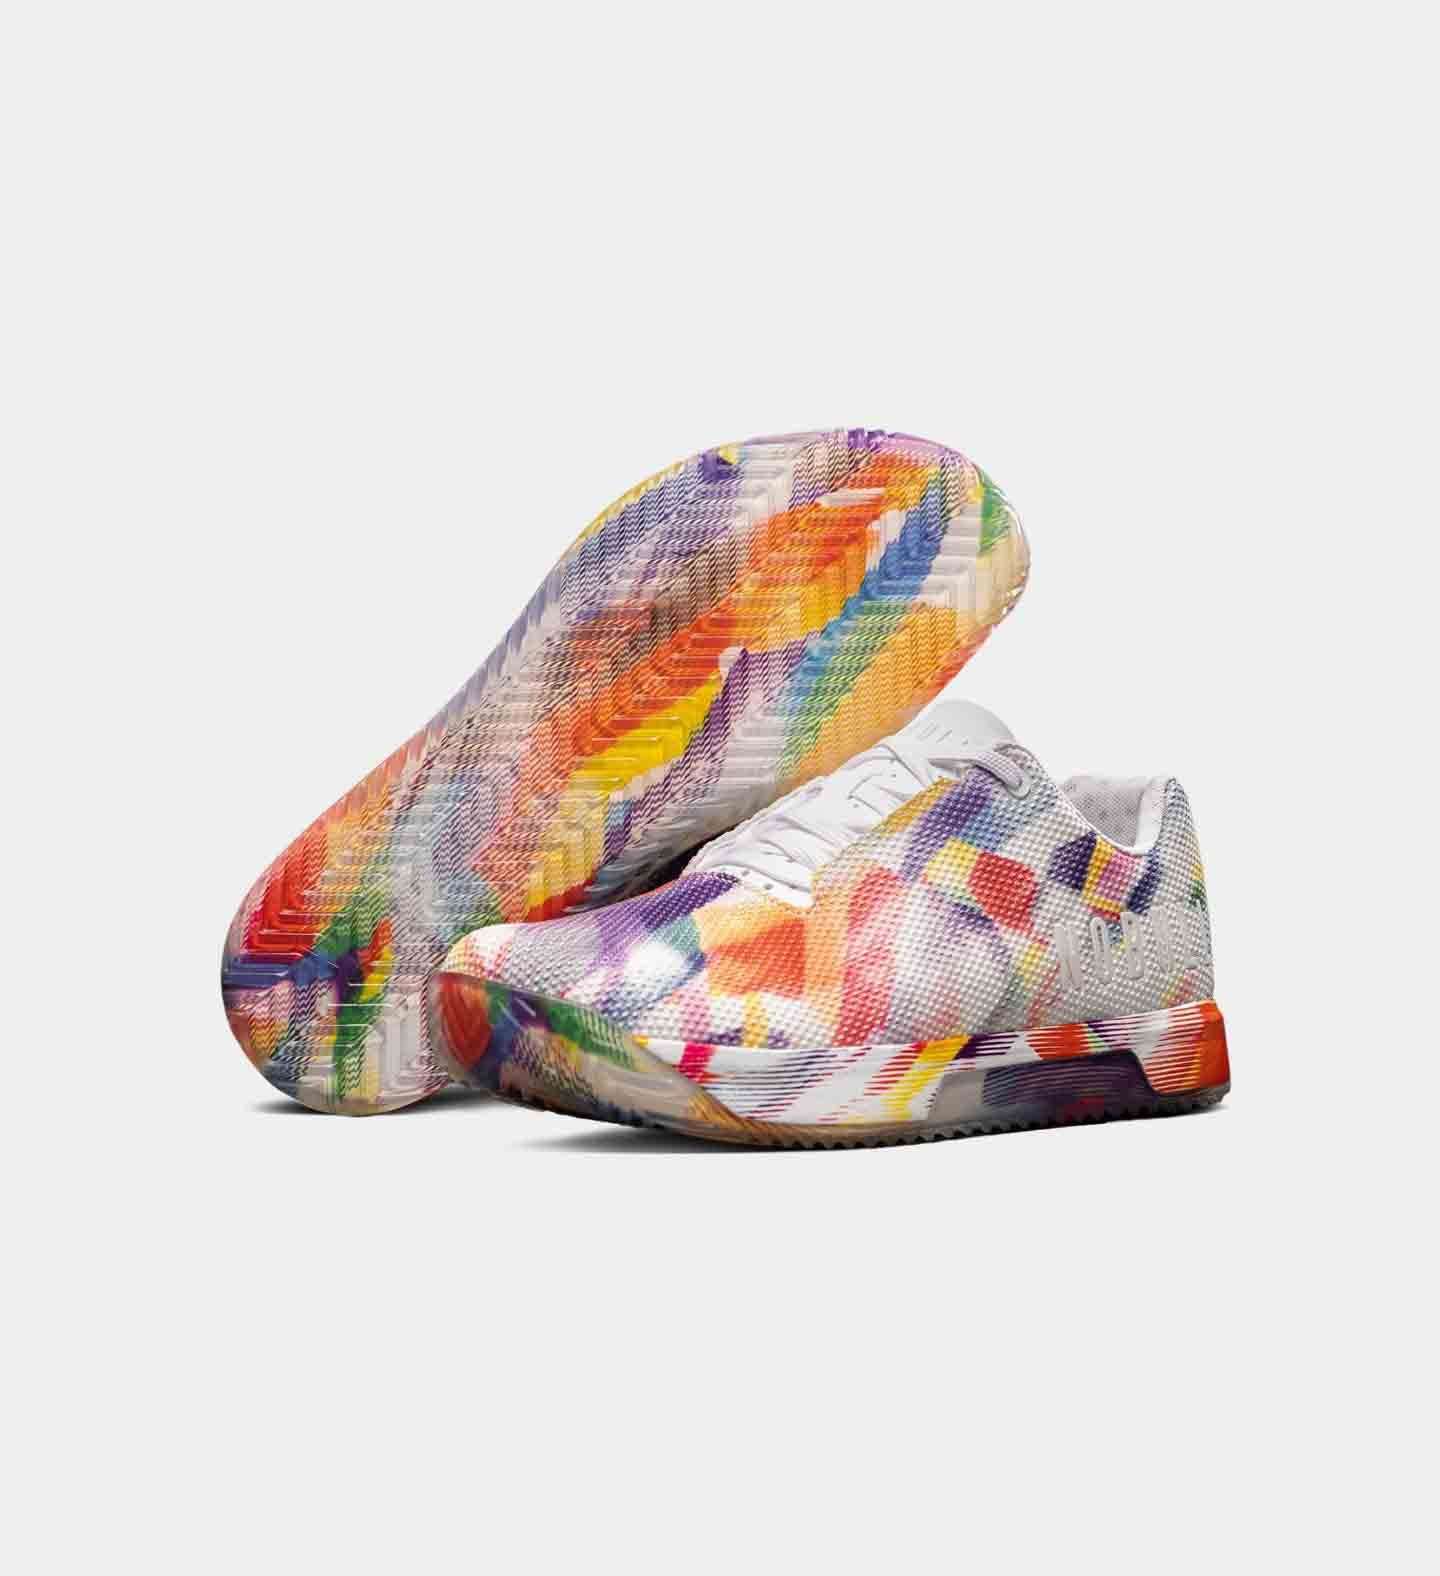 NOBULL Drops Rainbow-Inspired Trainers and Apparel for Pride Month